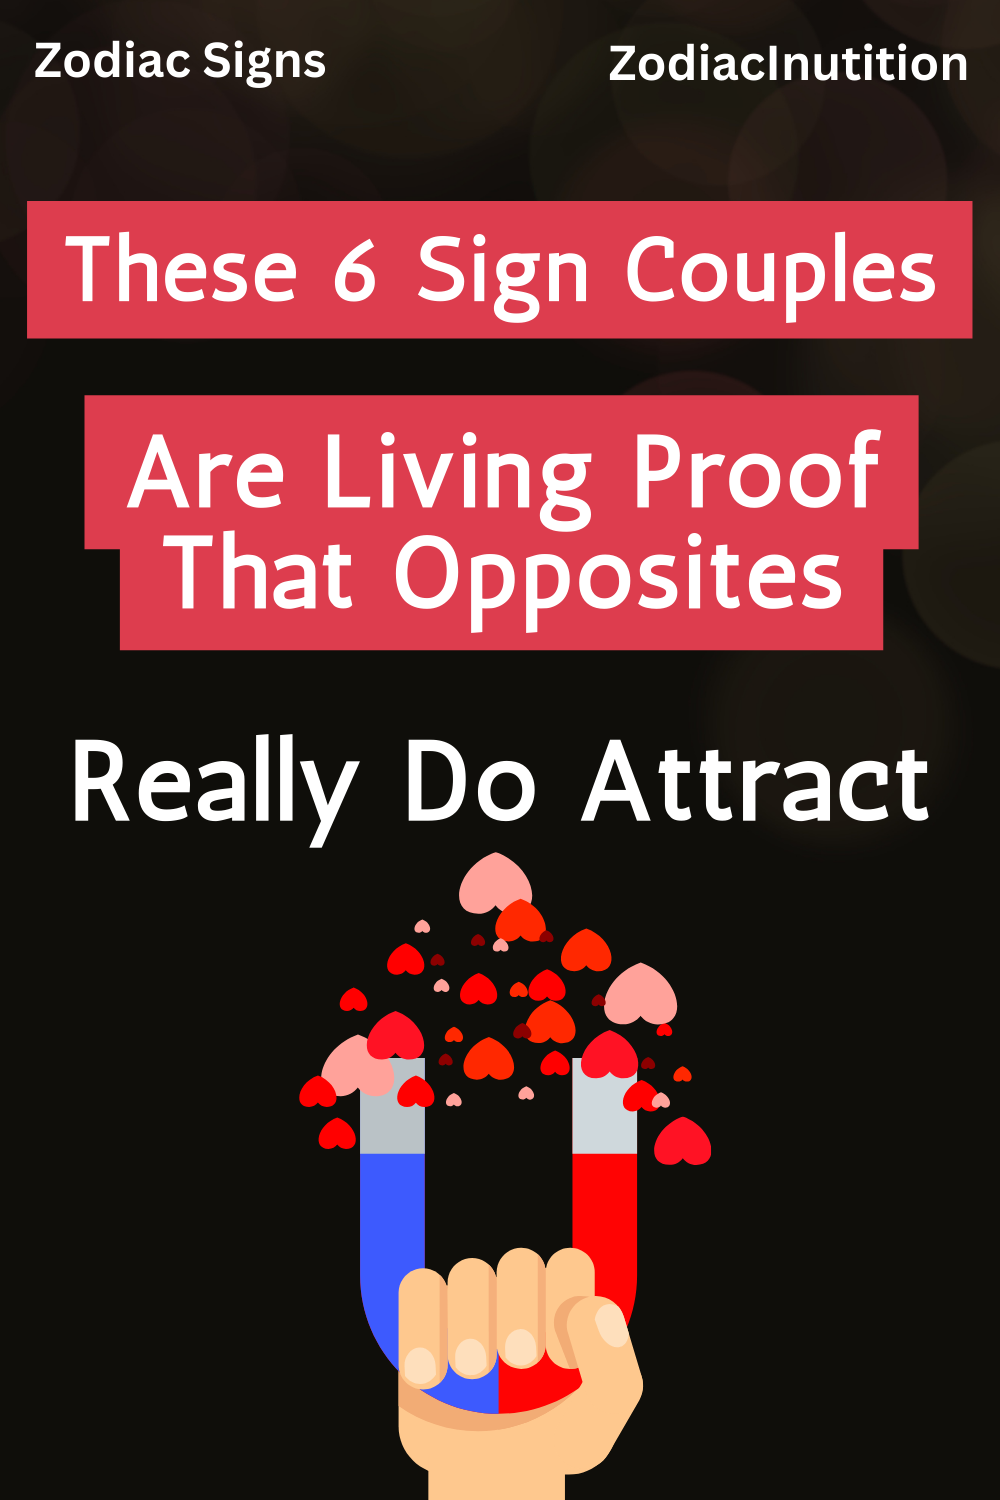 These 6 Sign Couples Are Living Proof That Opposites Really Do Attract